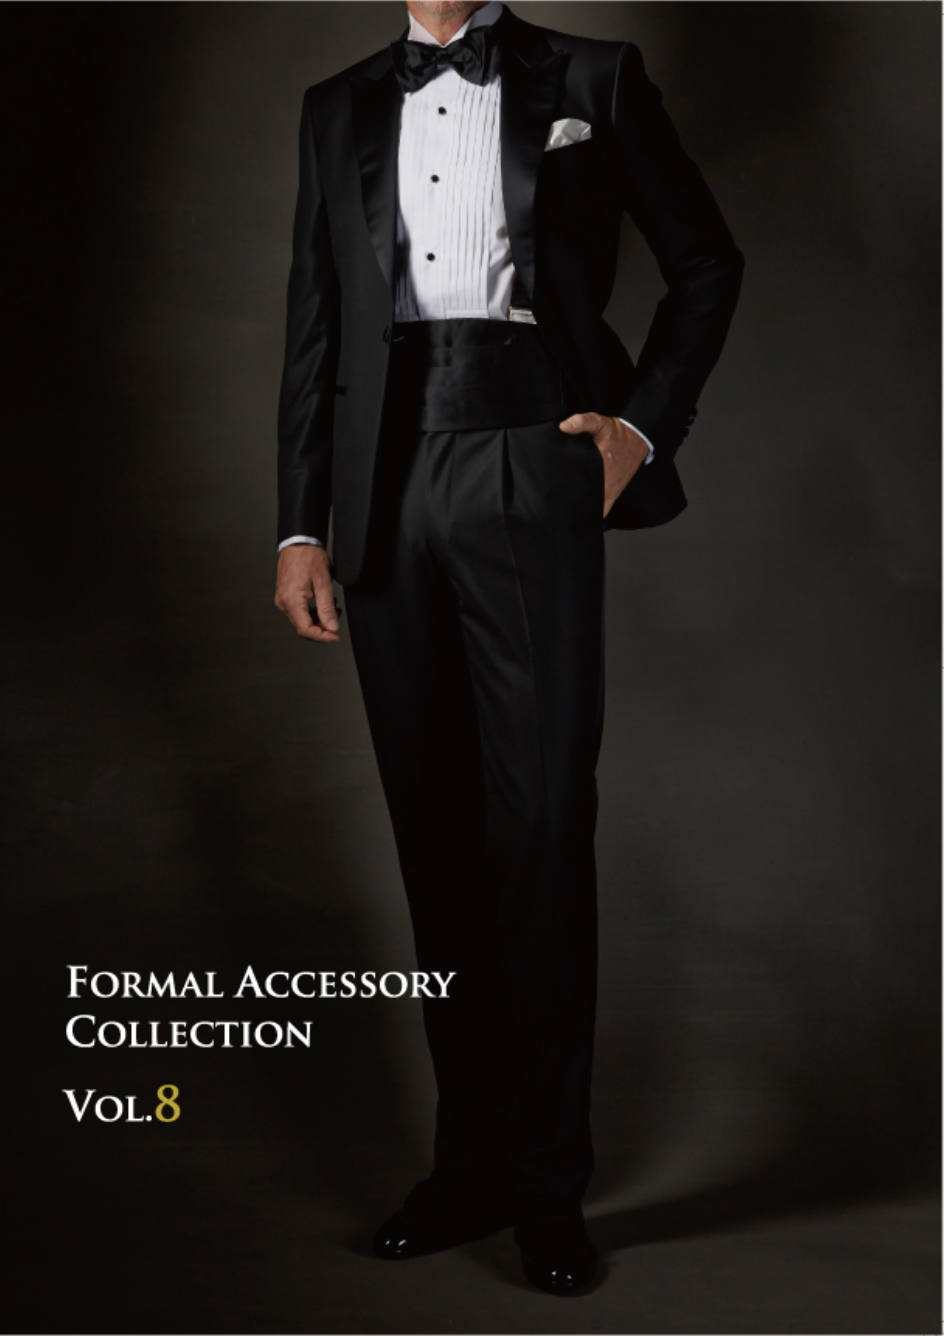 EXCY FORMAL ACCESSORY COLLECTION Vol.8 cover